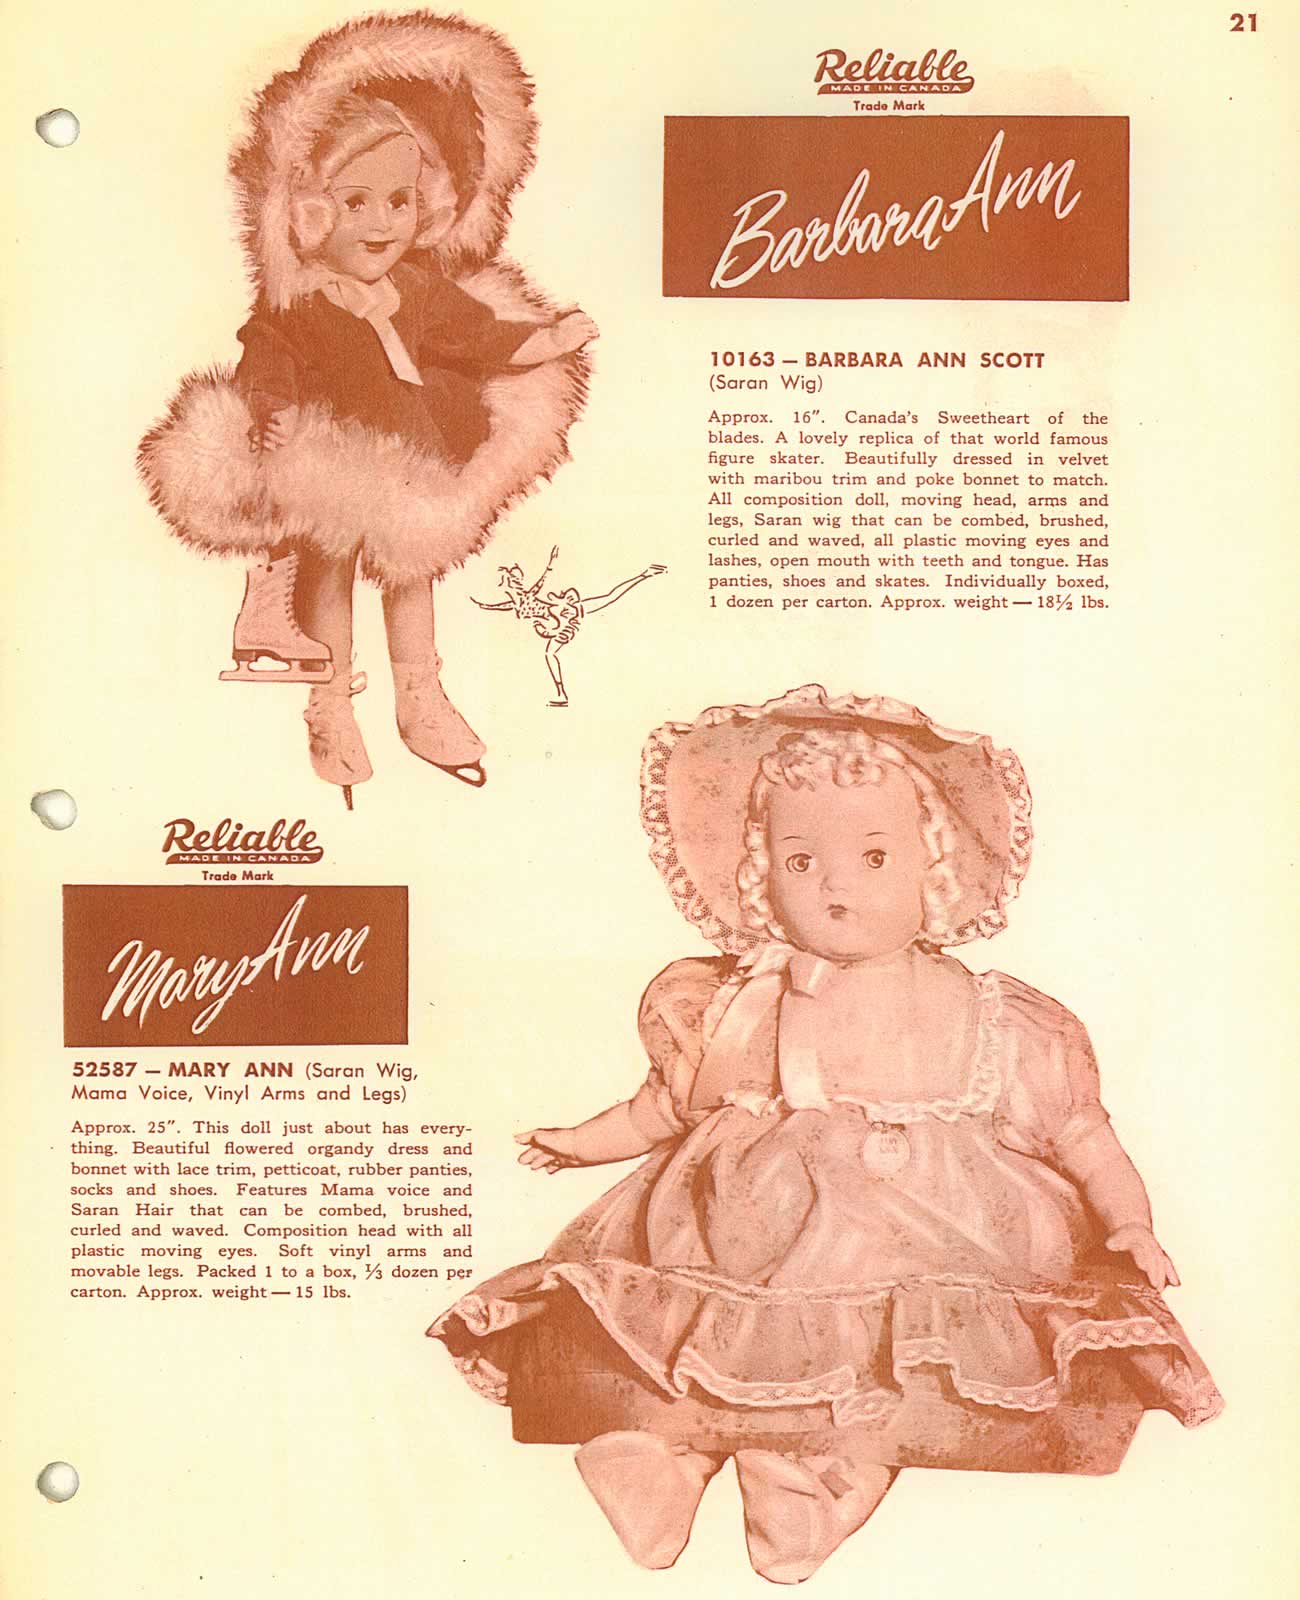 Digital scan of a page from the 1950 Reliable Toy catalogue featuring the company's Barbara Ann Scott and Mary Ann dolls. The Barbara Ann Scott doll was one of the company's most successful products.